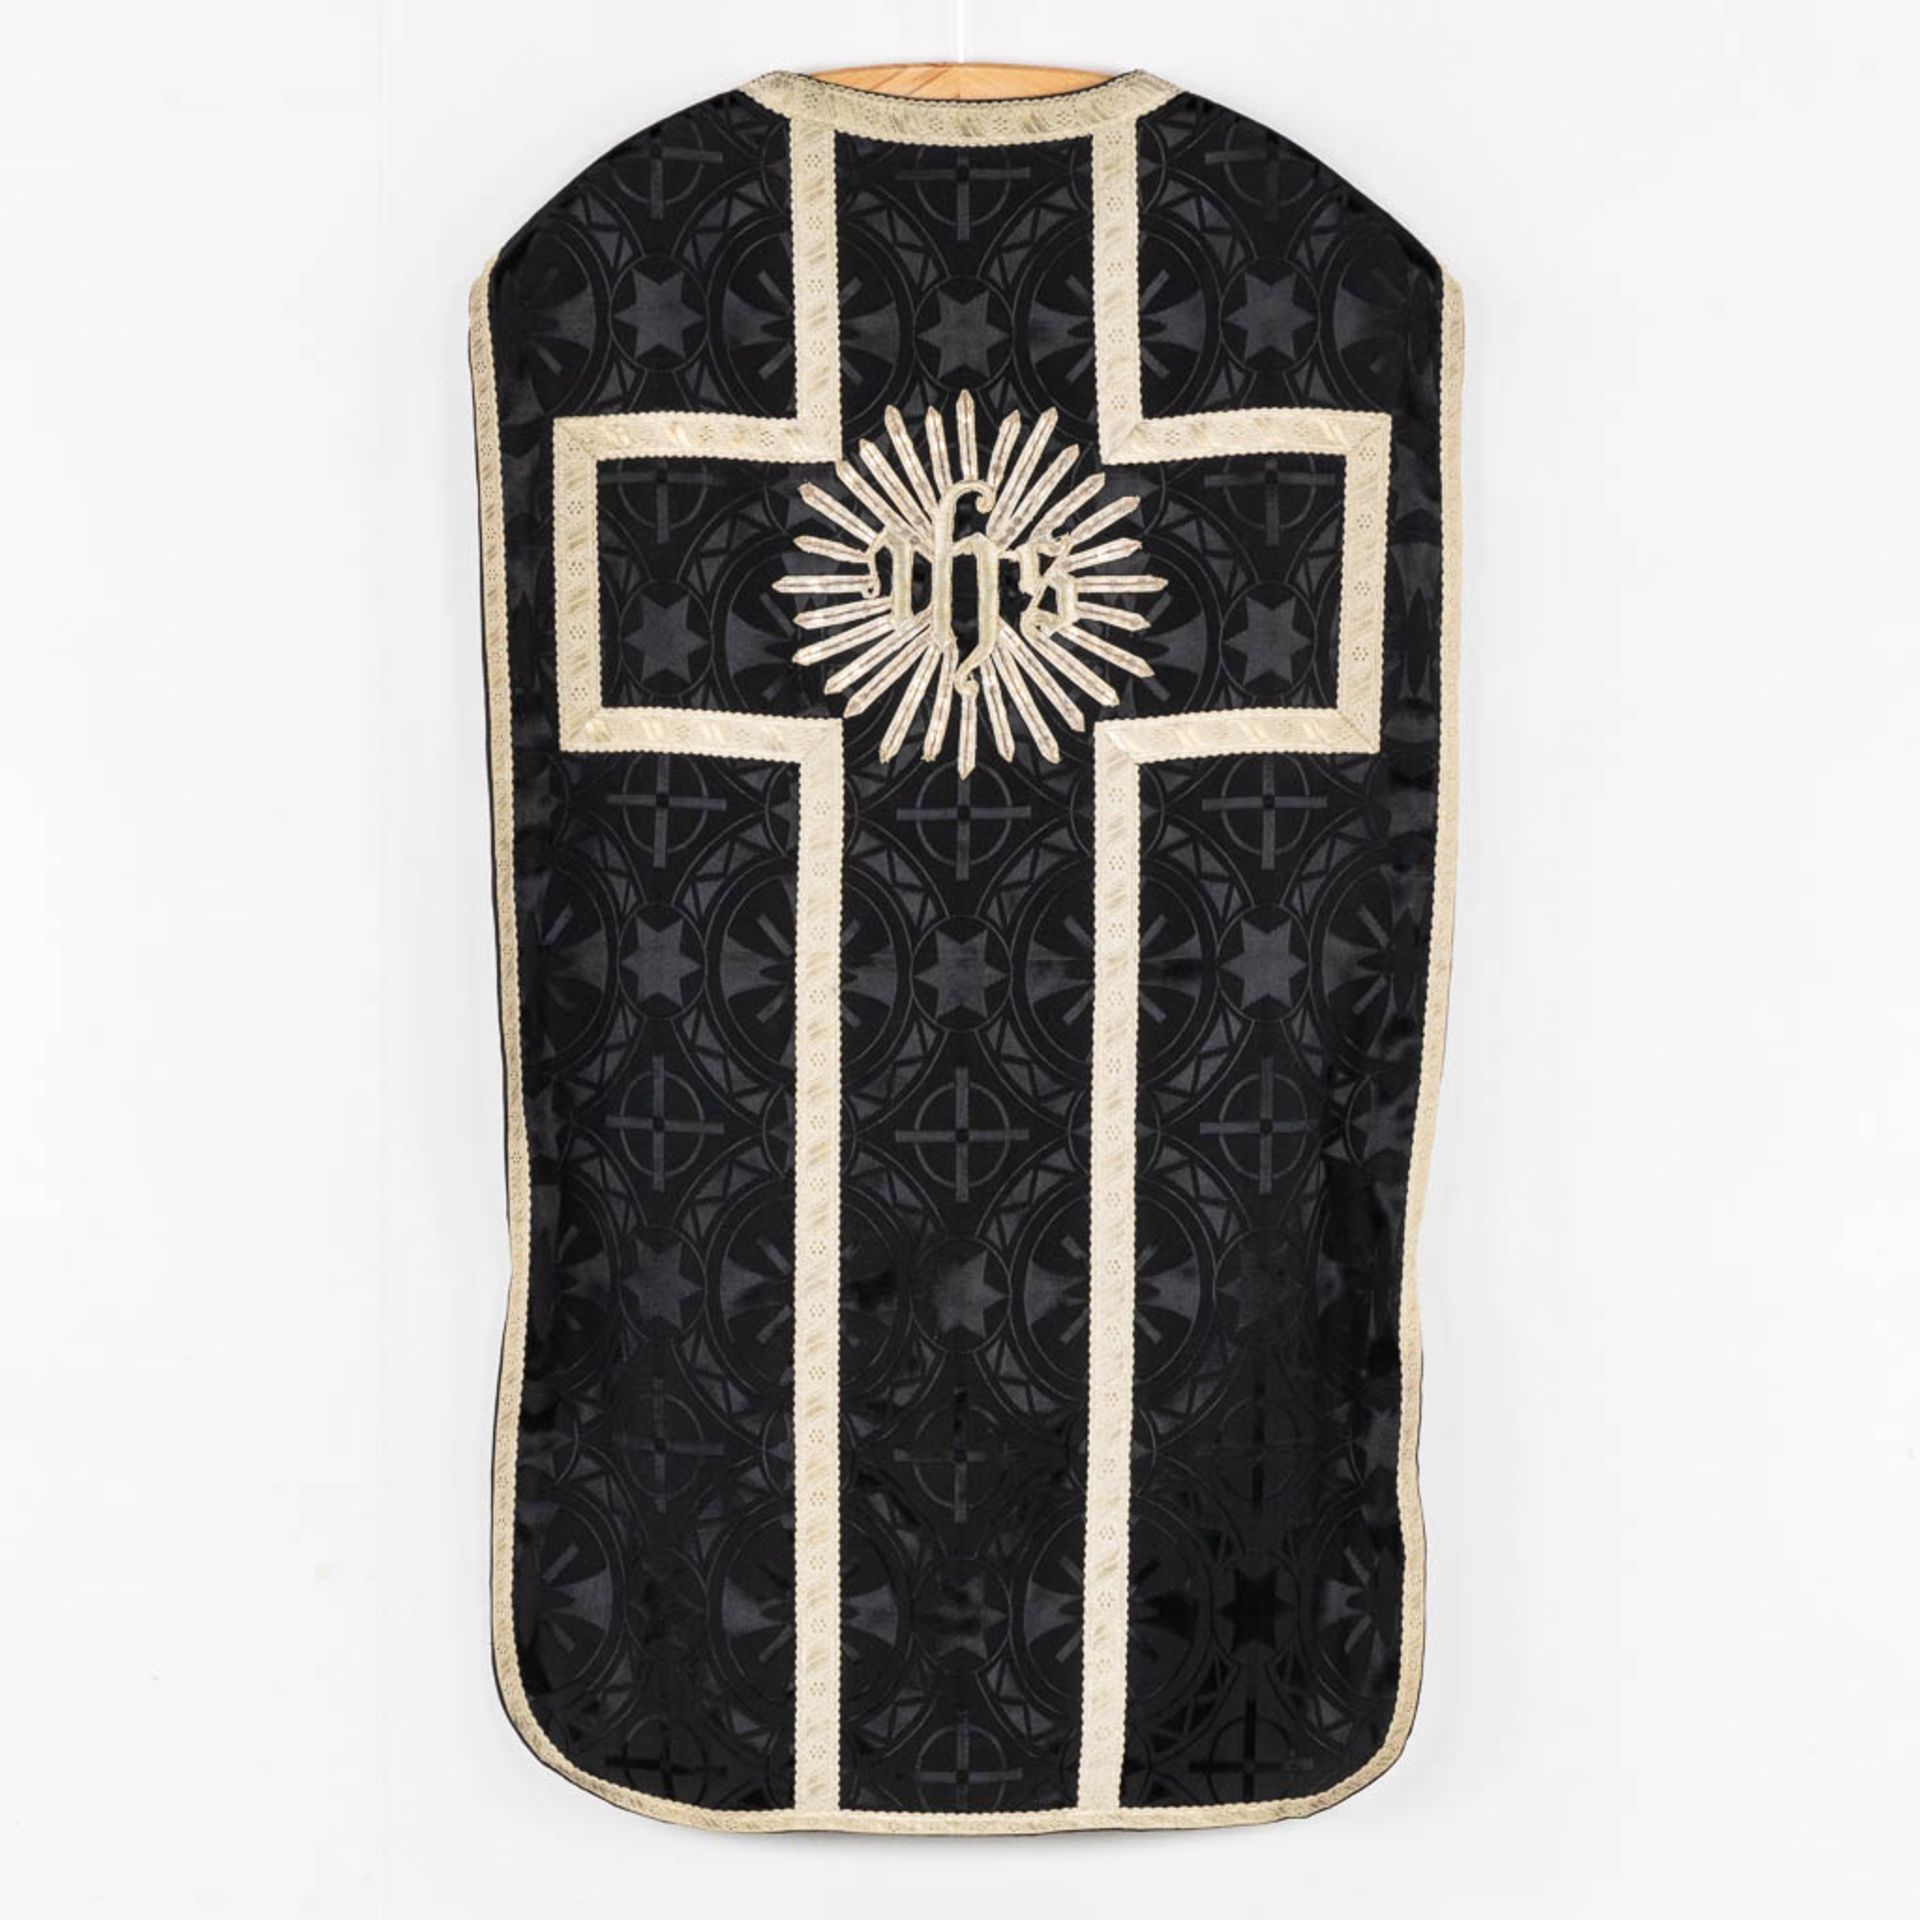 A Cope, Roman Chasuble and Stola, Thick silver brocade embroideries. - Image 7 of 13